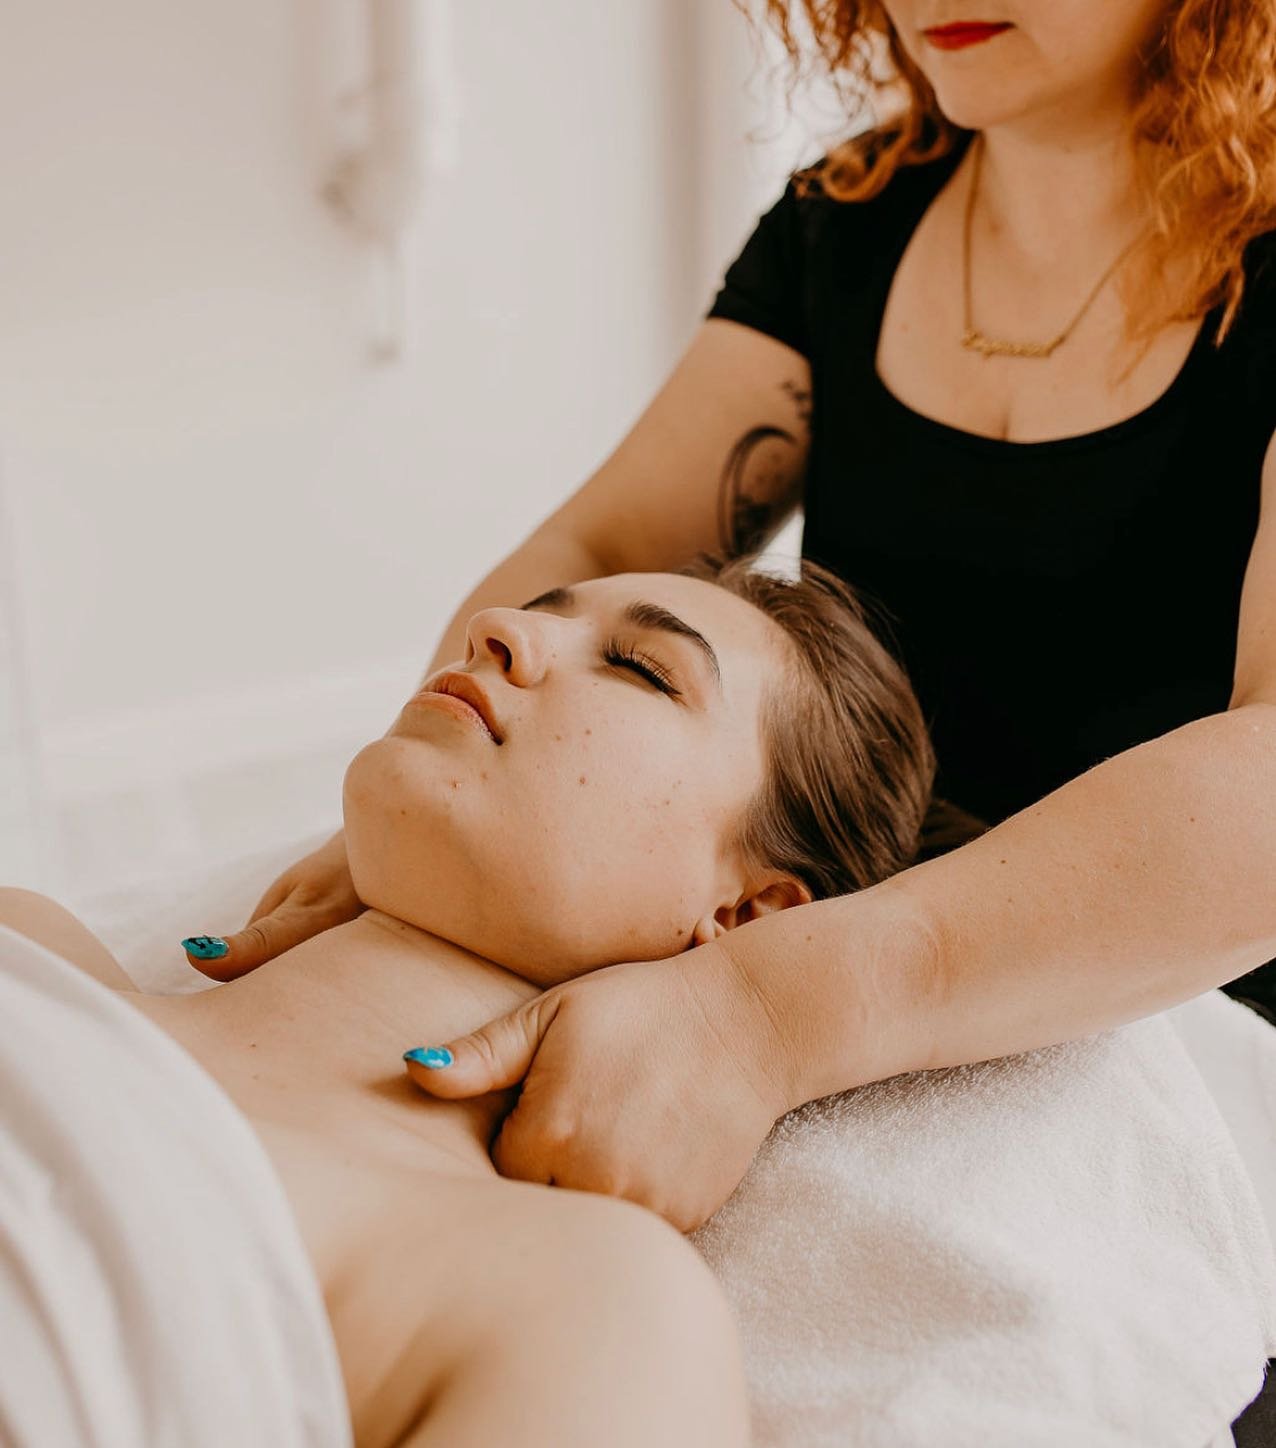 Did you know we direct bill to most major insurance companies? 💆🏻&zwj;♀️
We try to be as convenient as possible for our clients. ❣️
Book your massage with one of our wonderful RMTs. 

#winnipegmassage #winnipegmassagetherapy #stvitalmassage